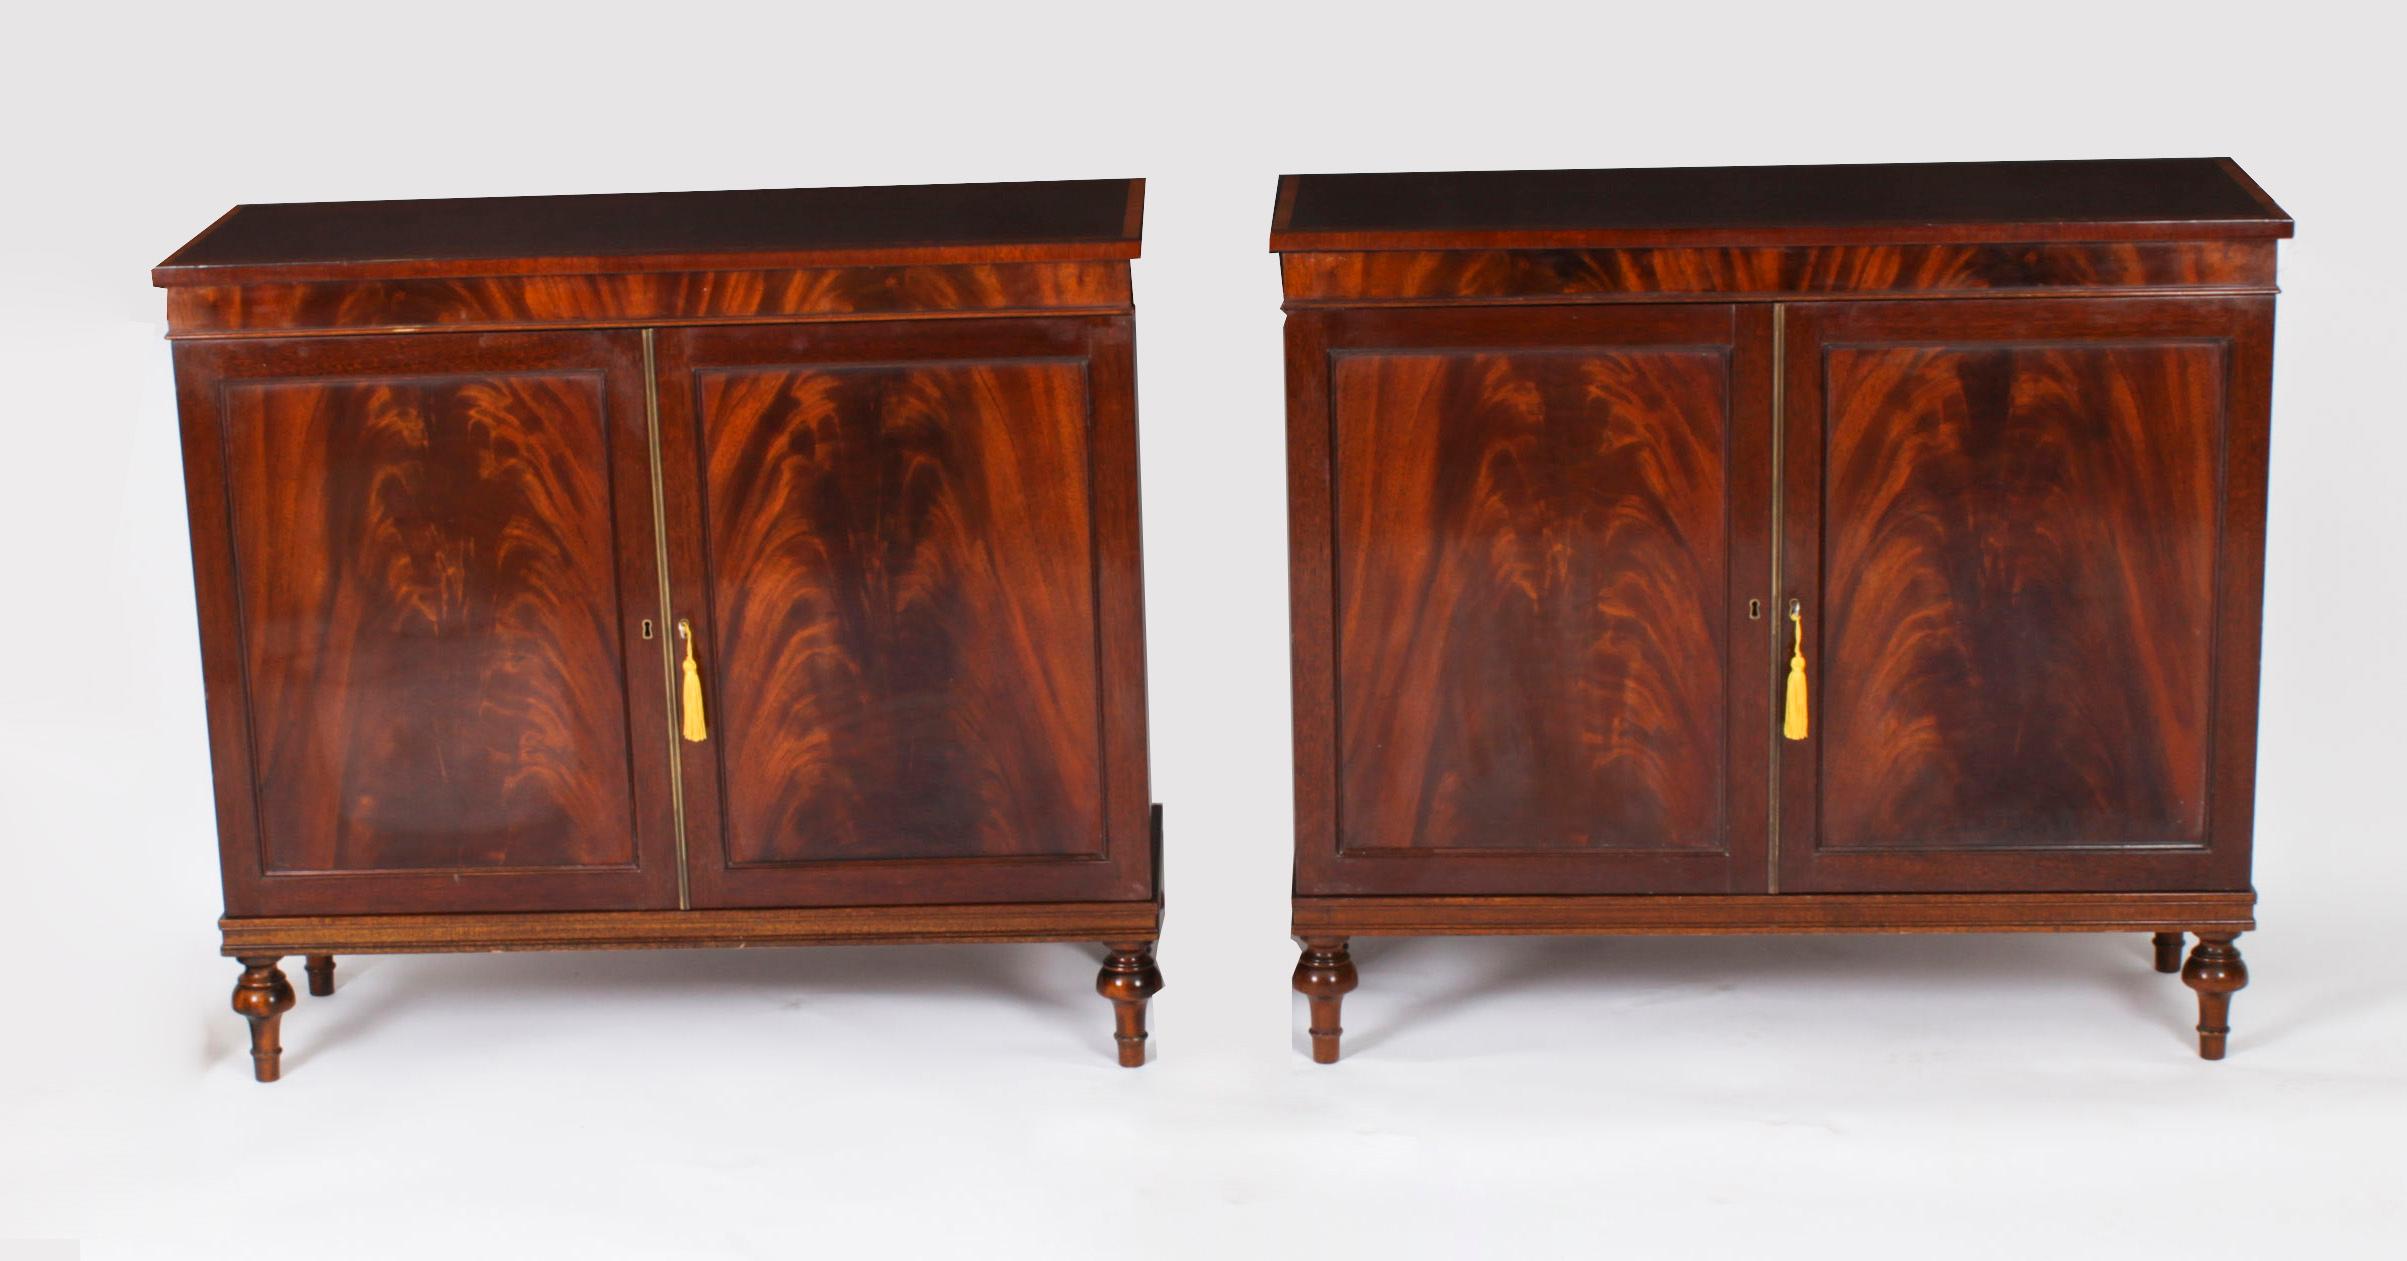 Regency Revival Vintage Pair Flame Mahogany Side Cabinets by William Tillman Late 20th Century For Sale